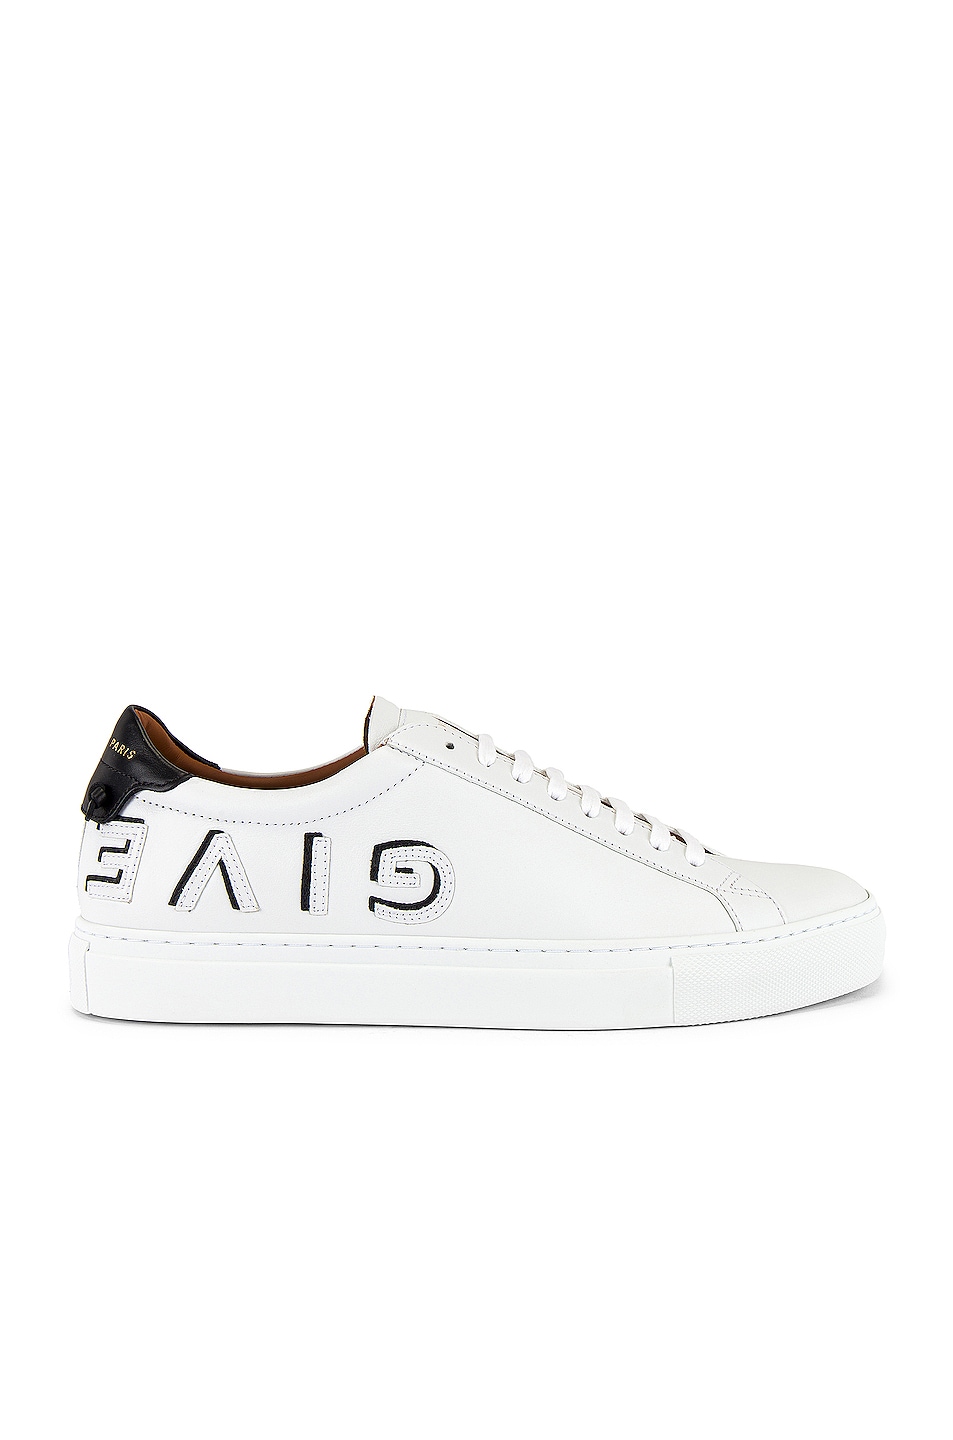 Image 1 of Givenchy Urban Street Sneaker in White & Black